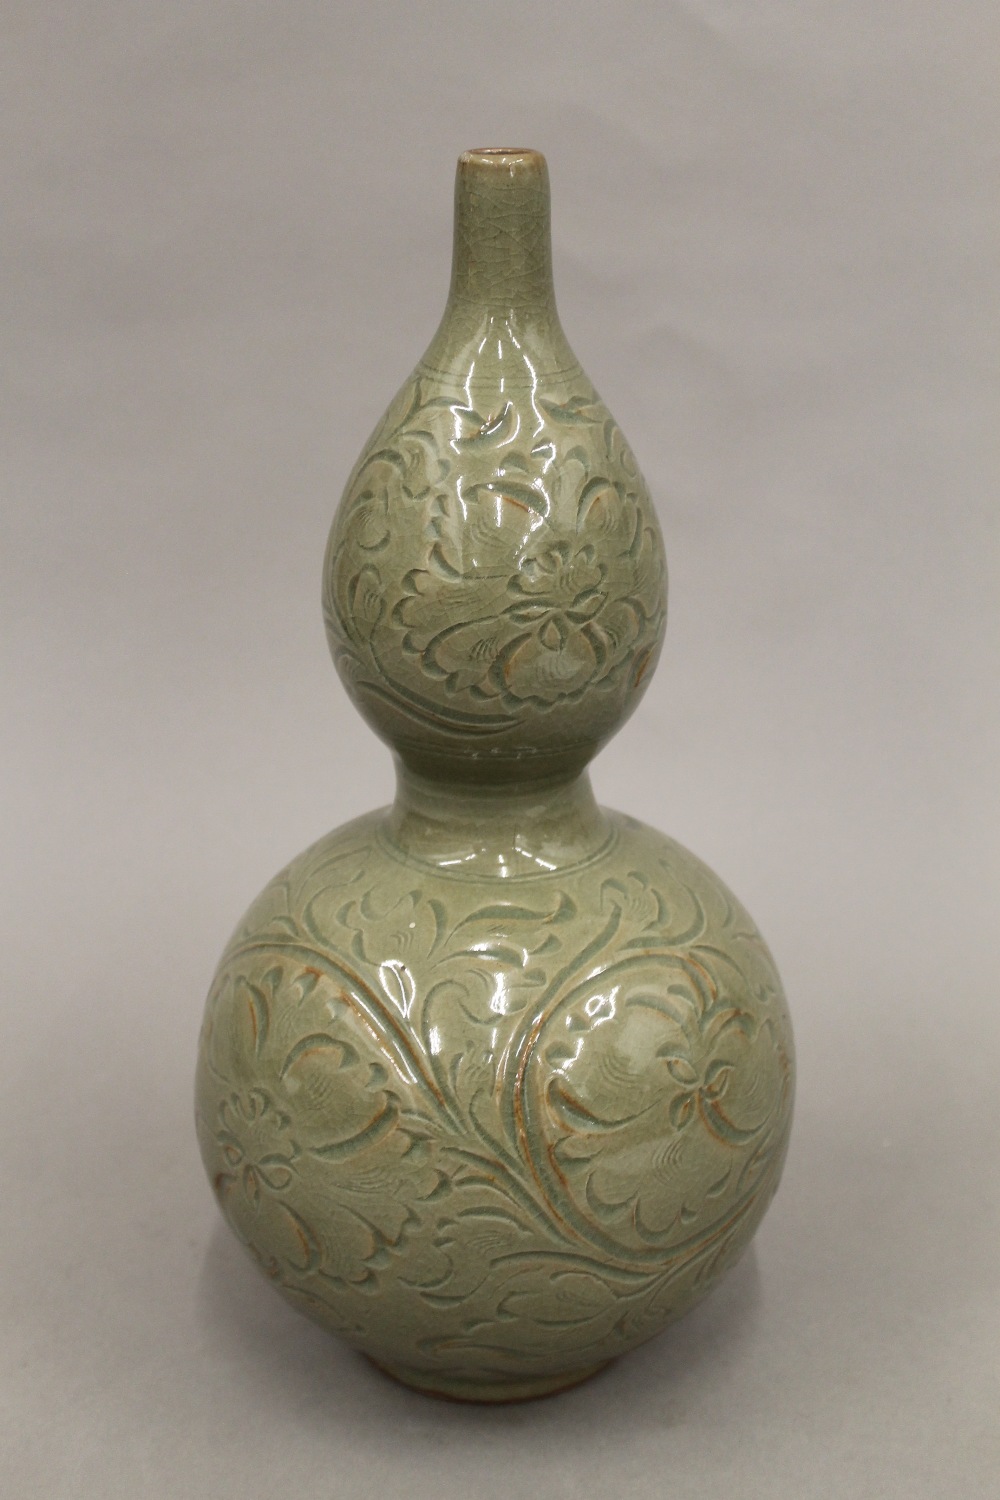 A Chinese double gourd celadon vase. 33.5 cm high.